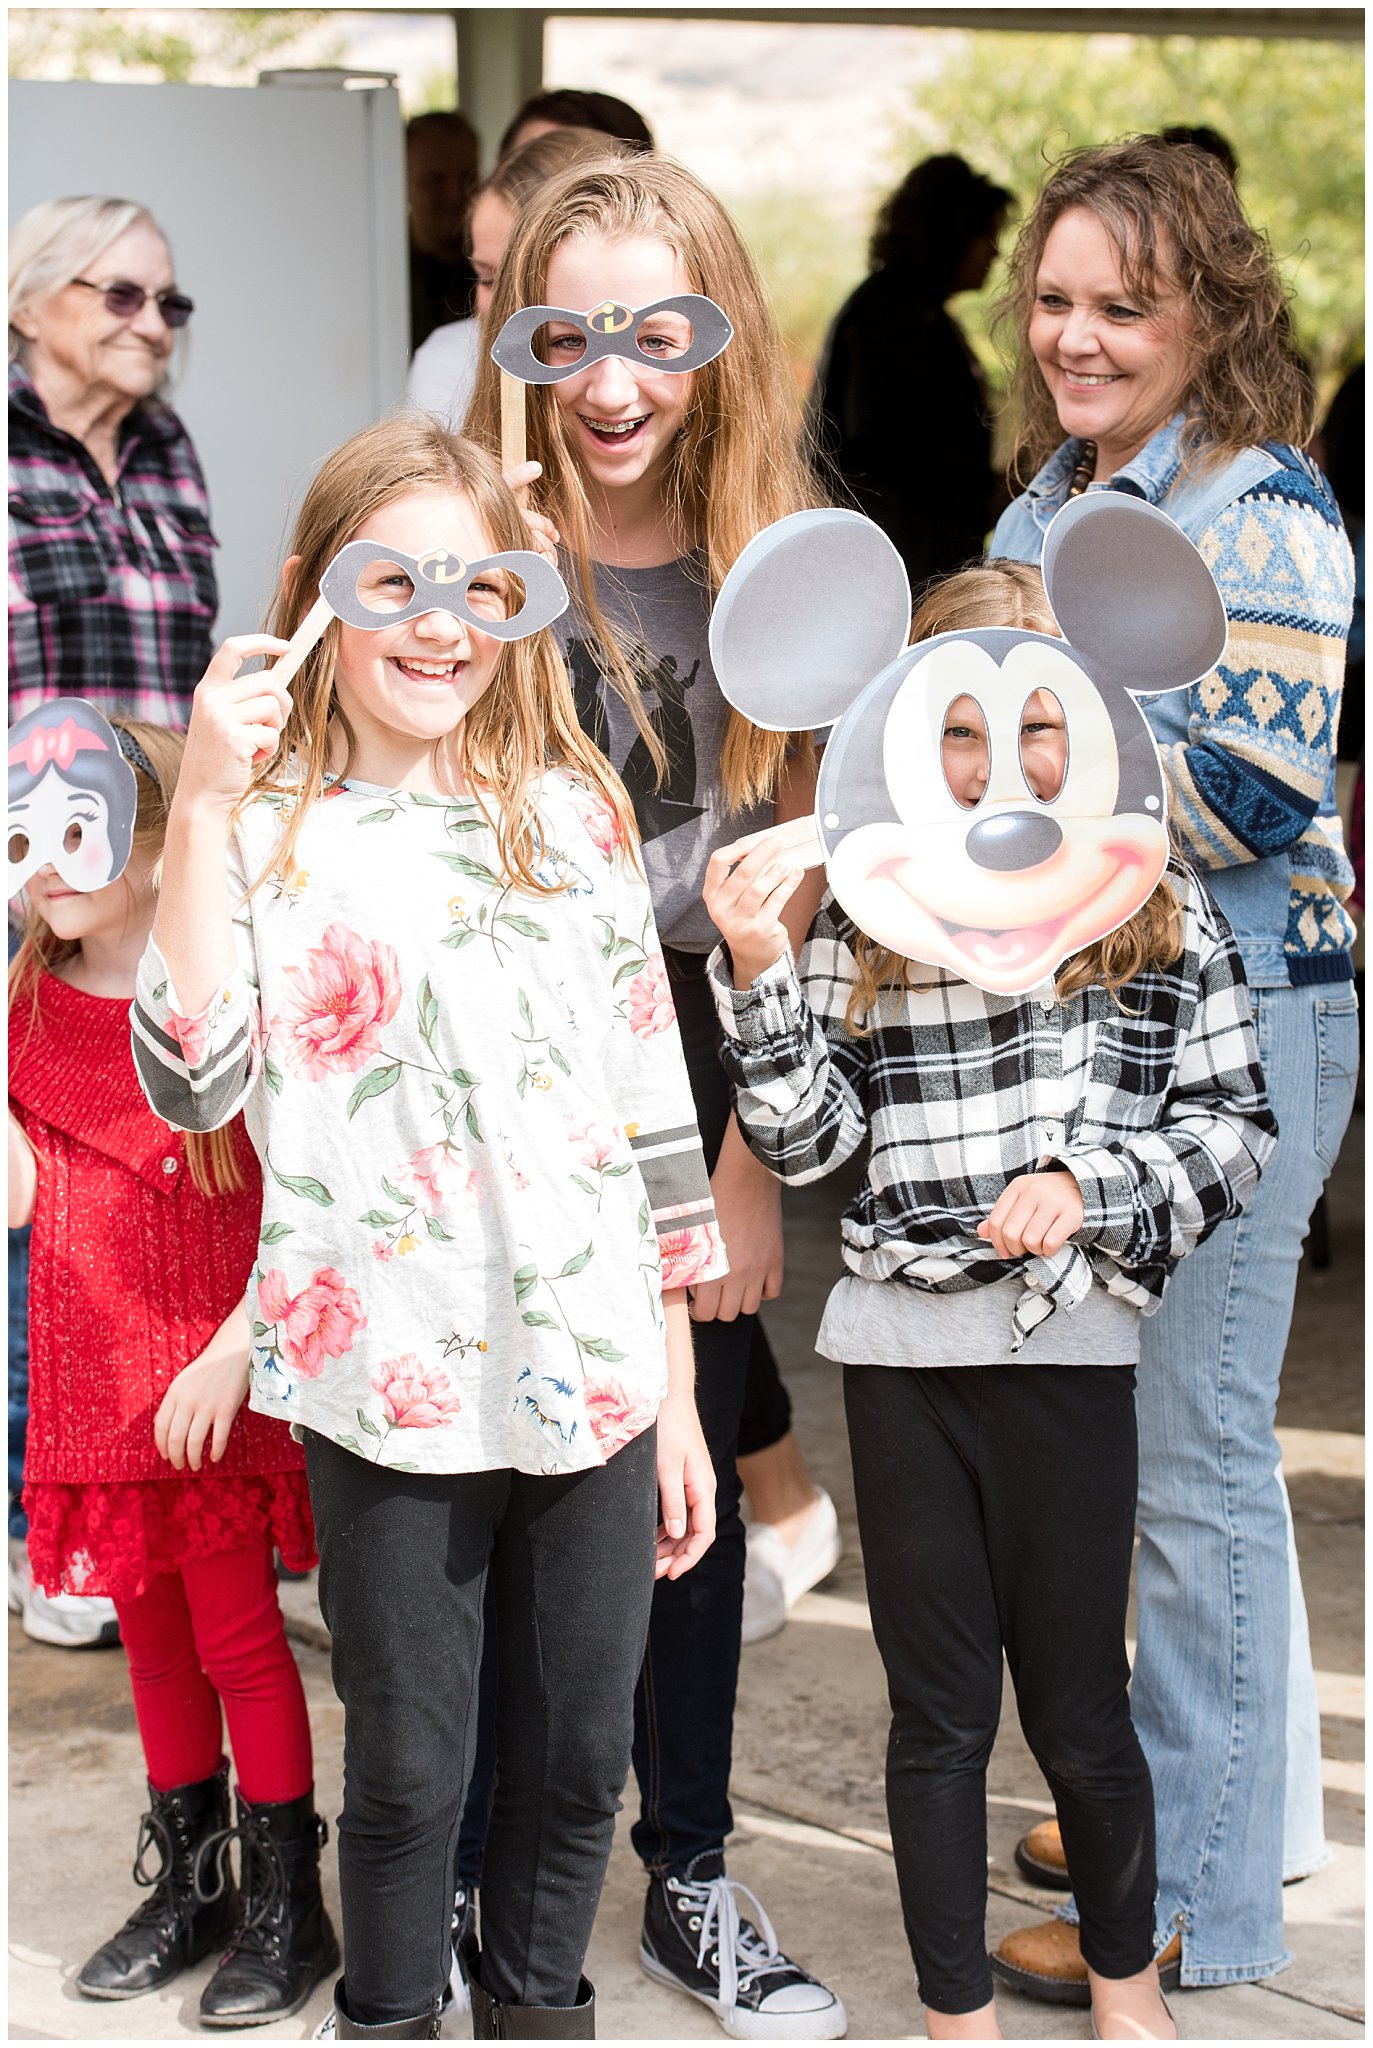 Wearing Disney character masks for big group picture | Tremonton Family Pictures and Make a Wish Event | Jessie and Dallin Photography